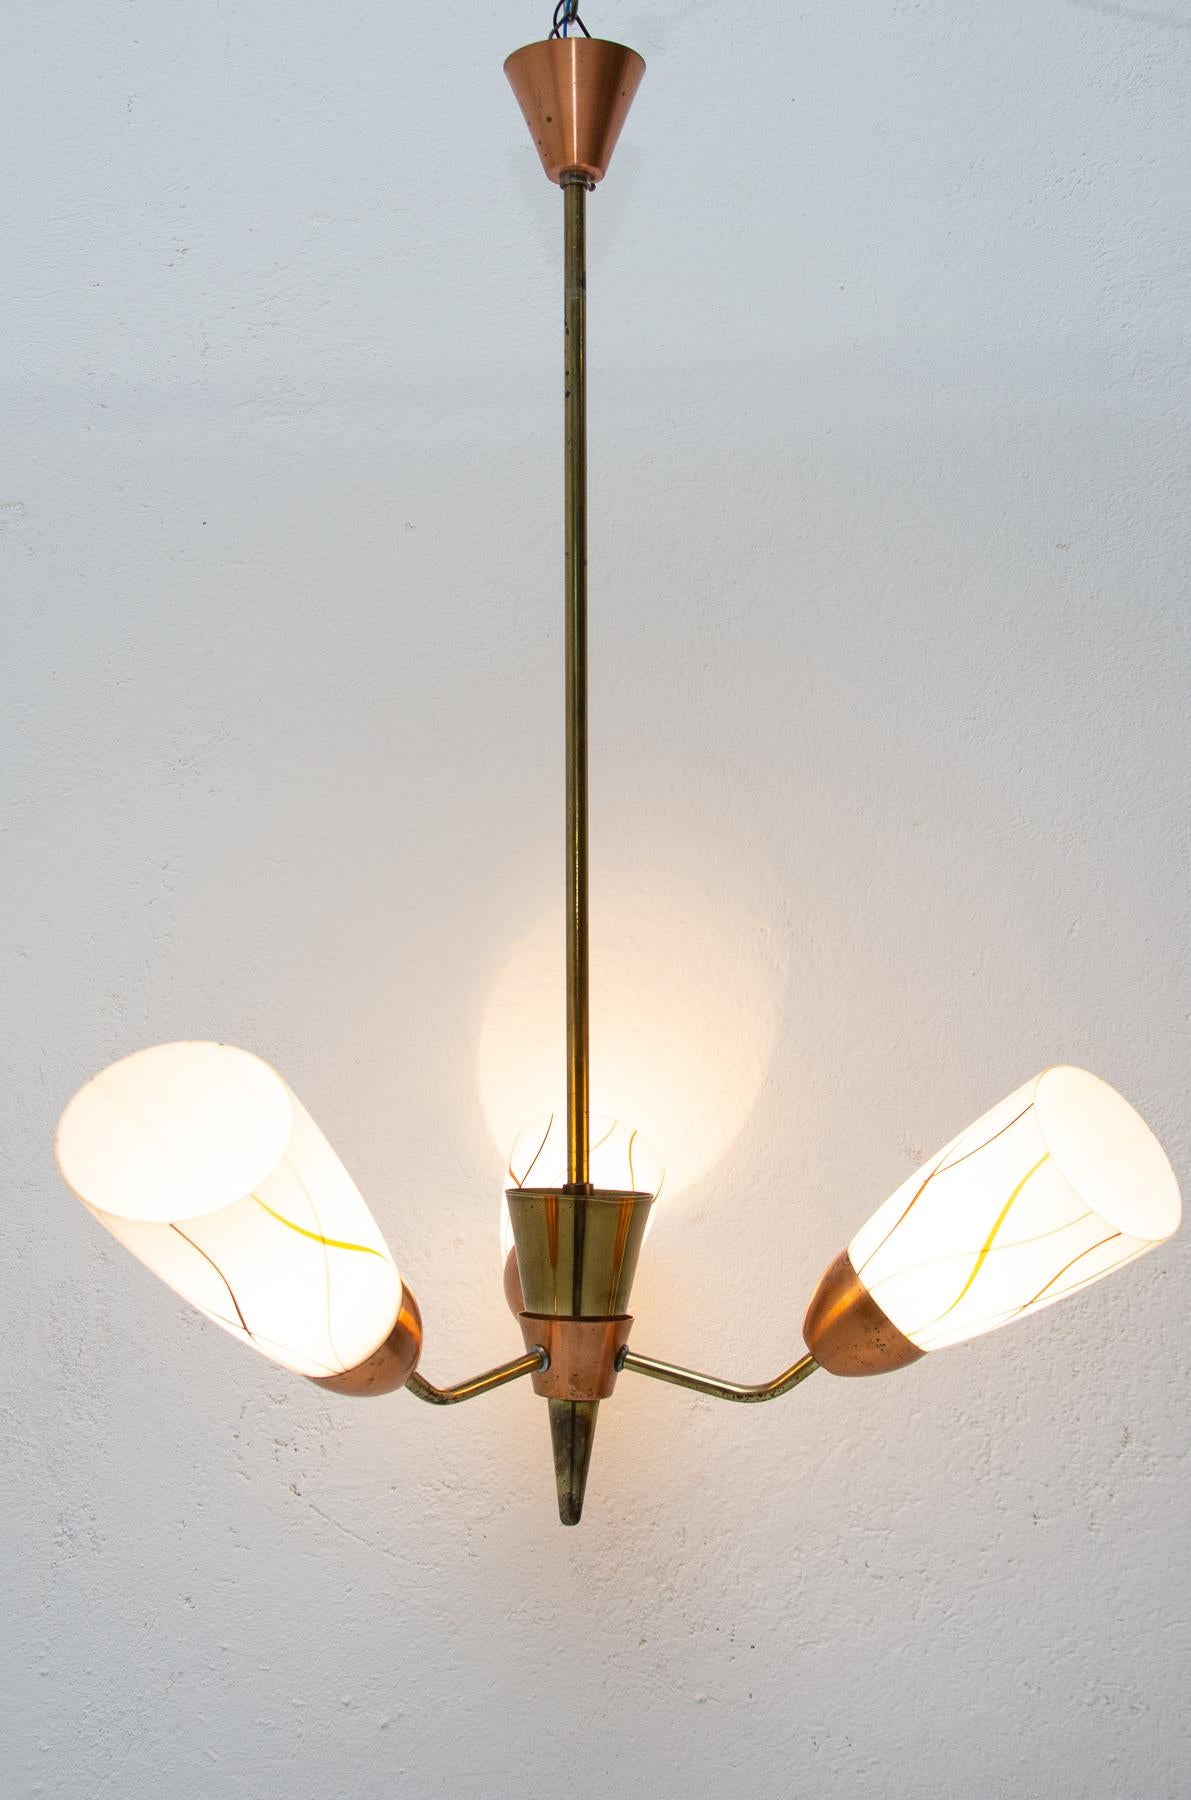 Midcentury copper and milky glass pendant lamp in the shape of the bloom, it was made in Czechoslovakia in the 1960s. In good condition, new wiring, slight signs of age and using

Measures: Lampshade height 20 cm.